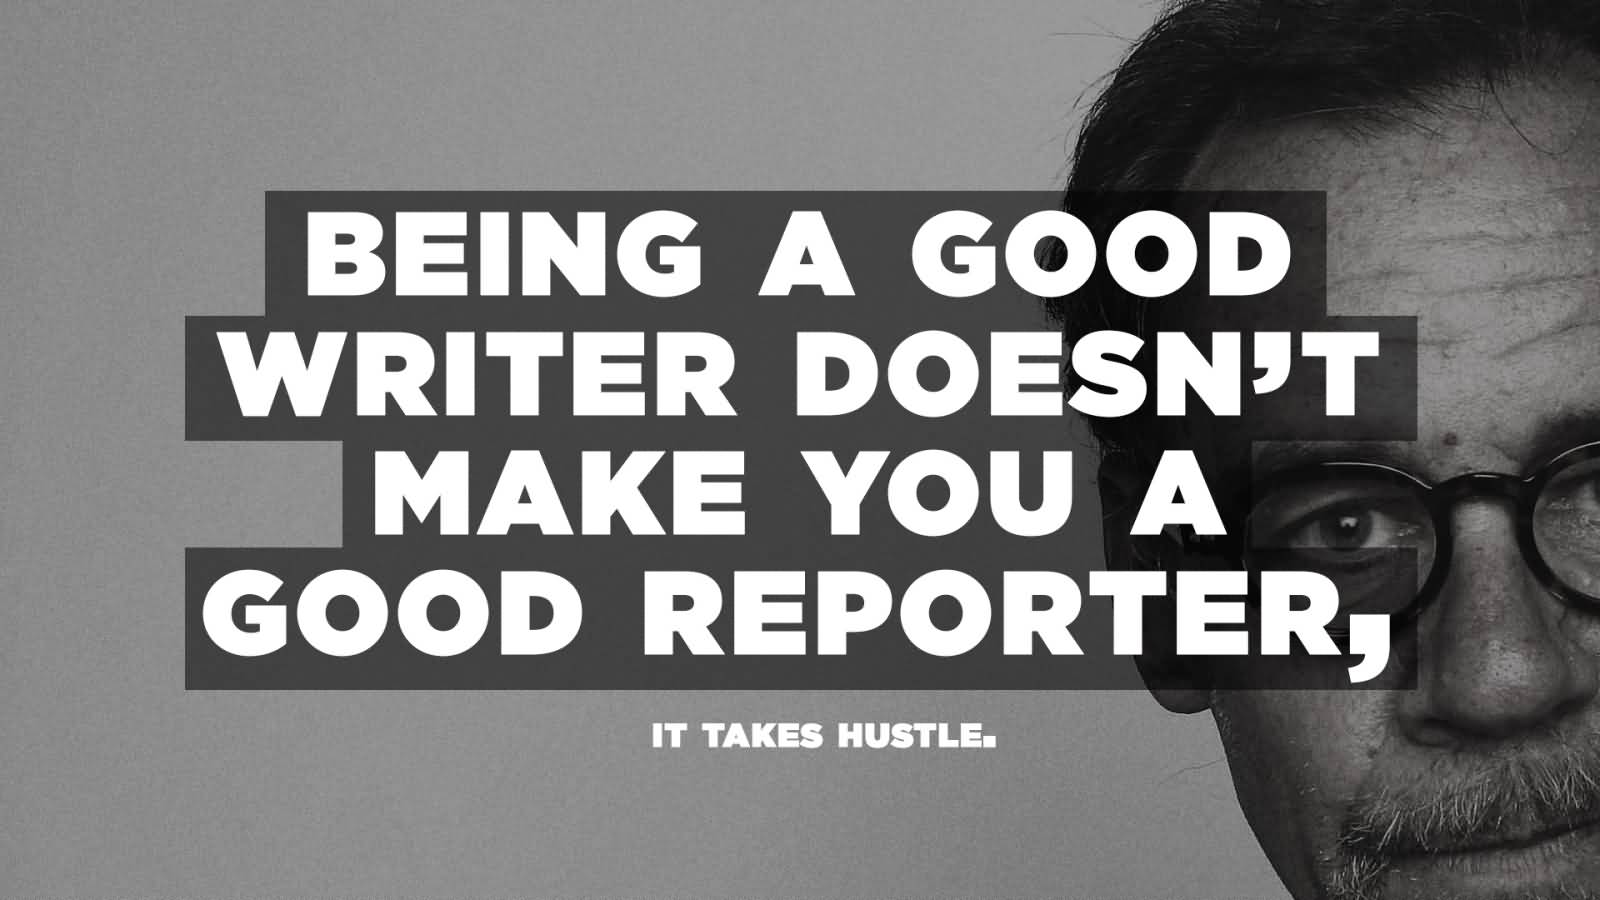 Being a good writer doesn't make you a good reporter, it takes hustle